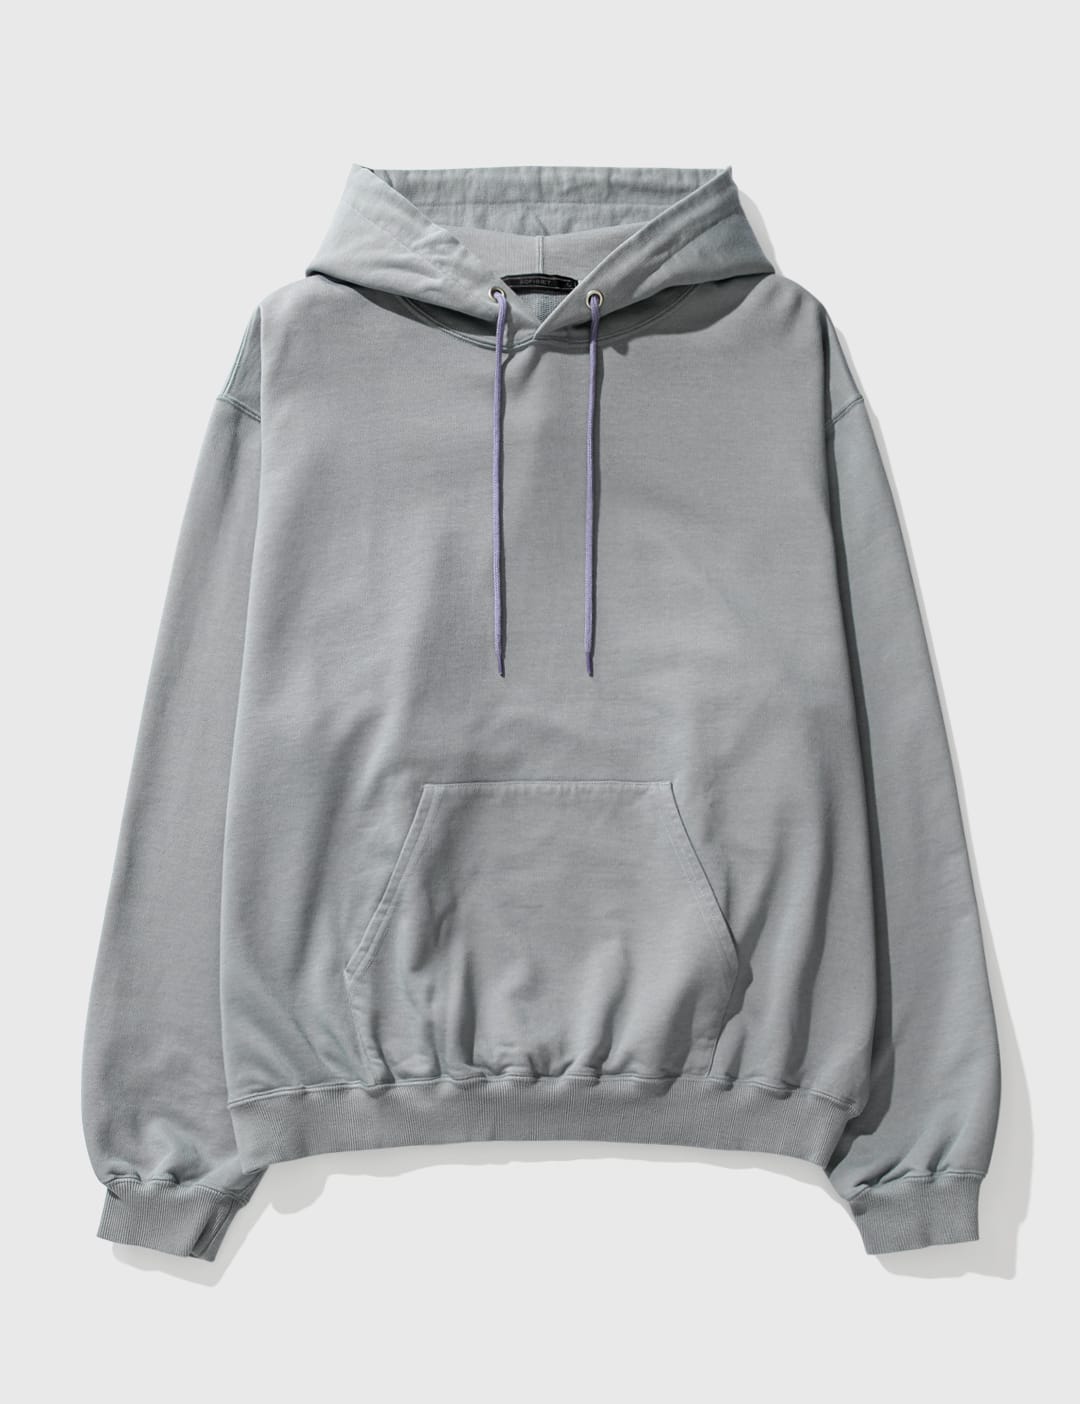 Dime - Basketbowl Patch Hoodie | HBX - Globally Curated Fashion 